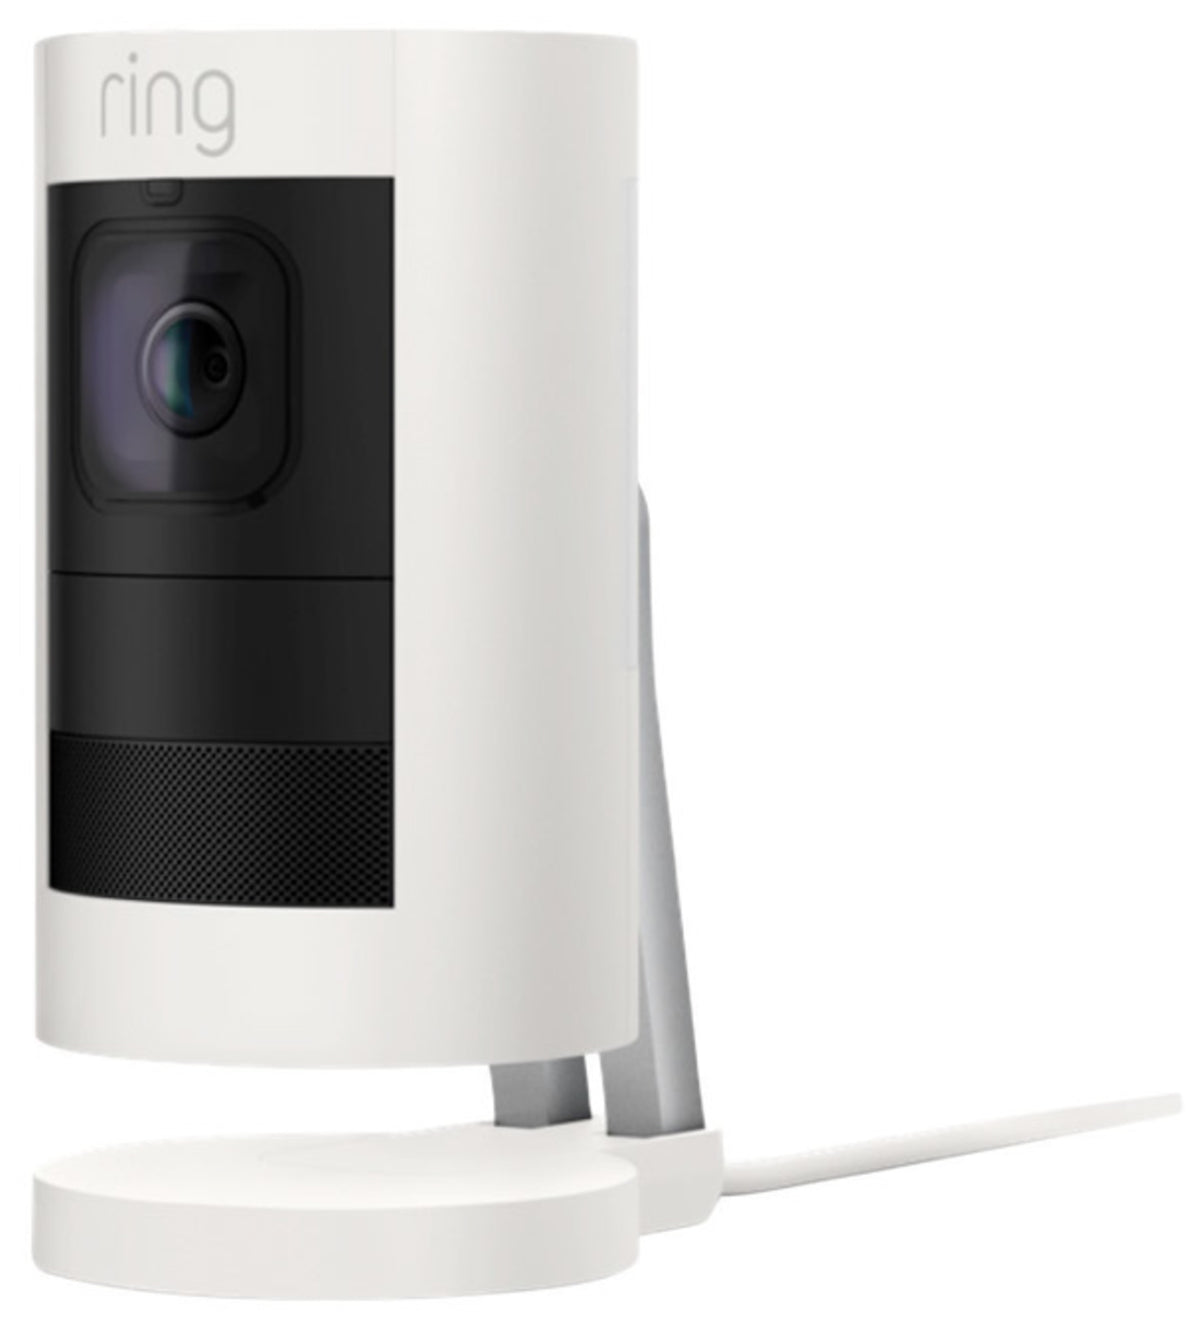 Ring 8SS1E8-WEN0 Hardwired Stick Up Wired Security Camera, White